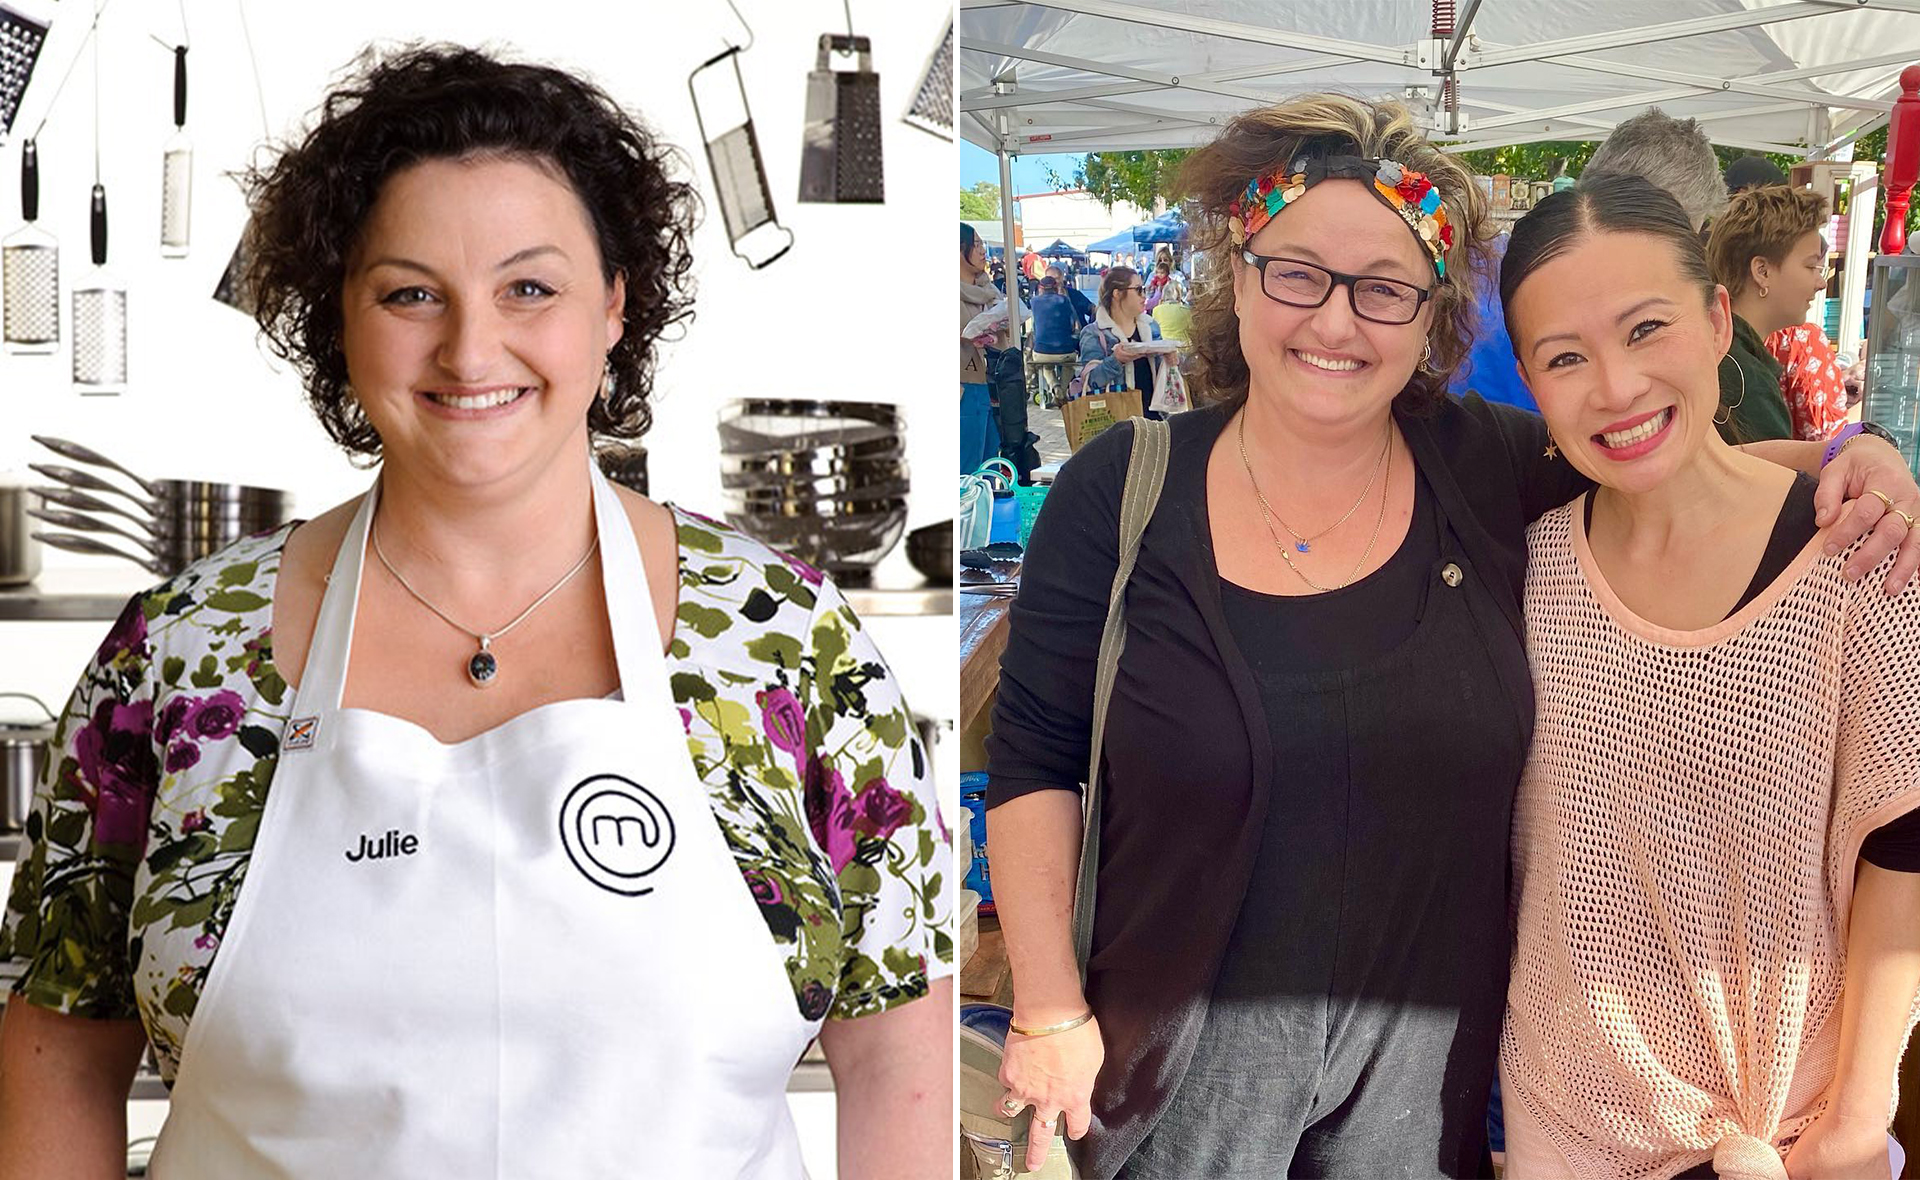 Julie Goodwin admits she’s “petrified” to compete on MasterChef Foodies vs Favourites next year